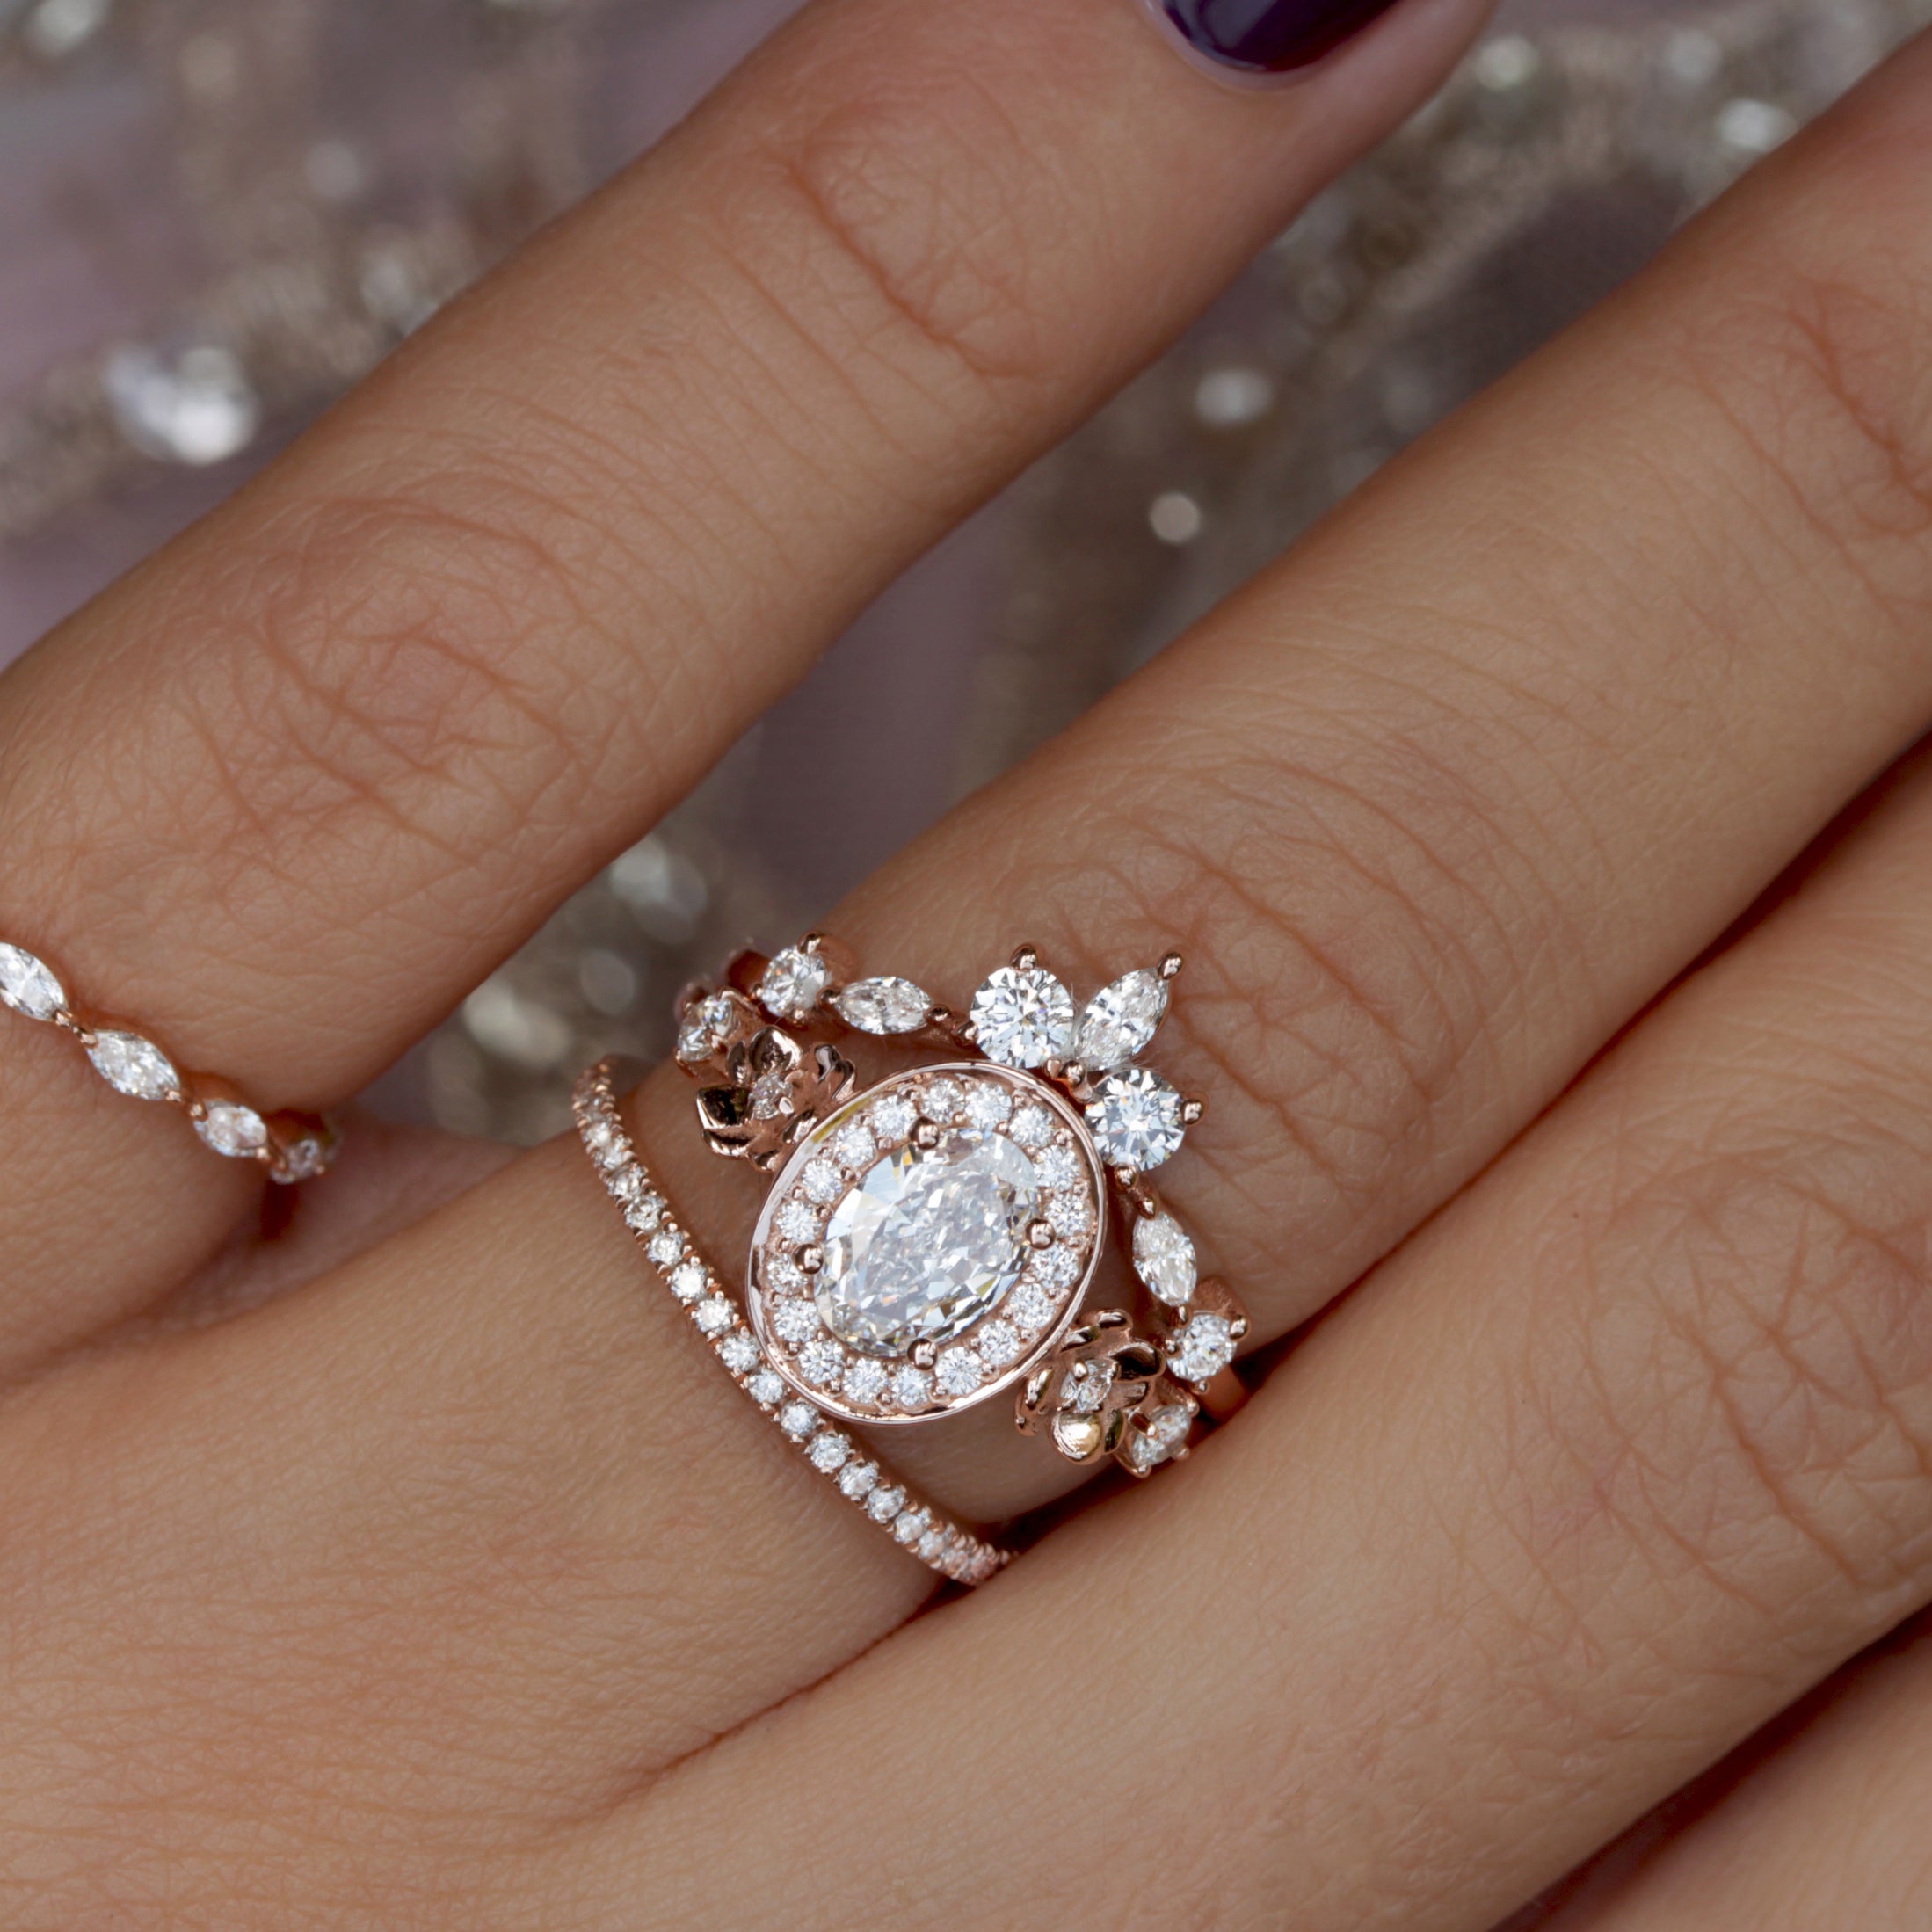 Oval Diamond Floral Ring "Antheia" & Two "Iceland" Sidebands ♥